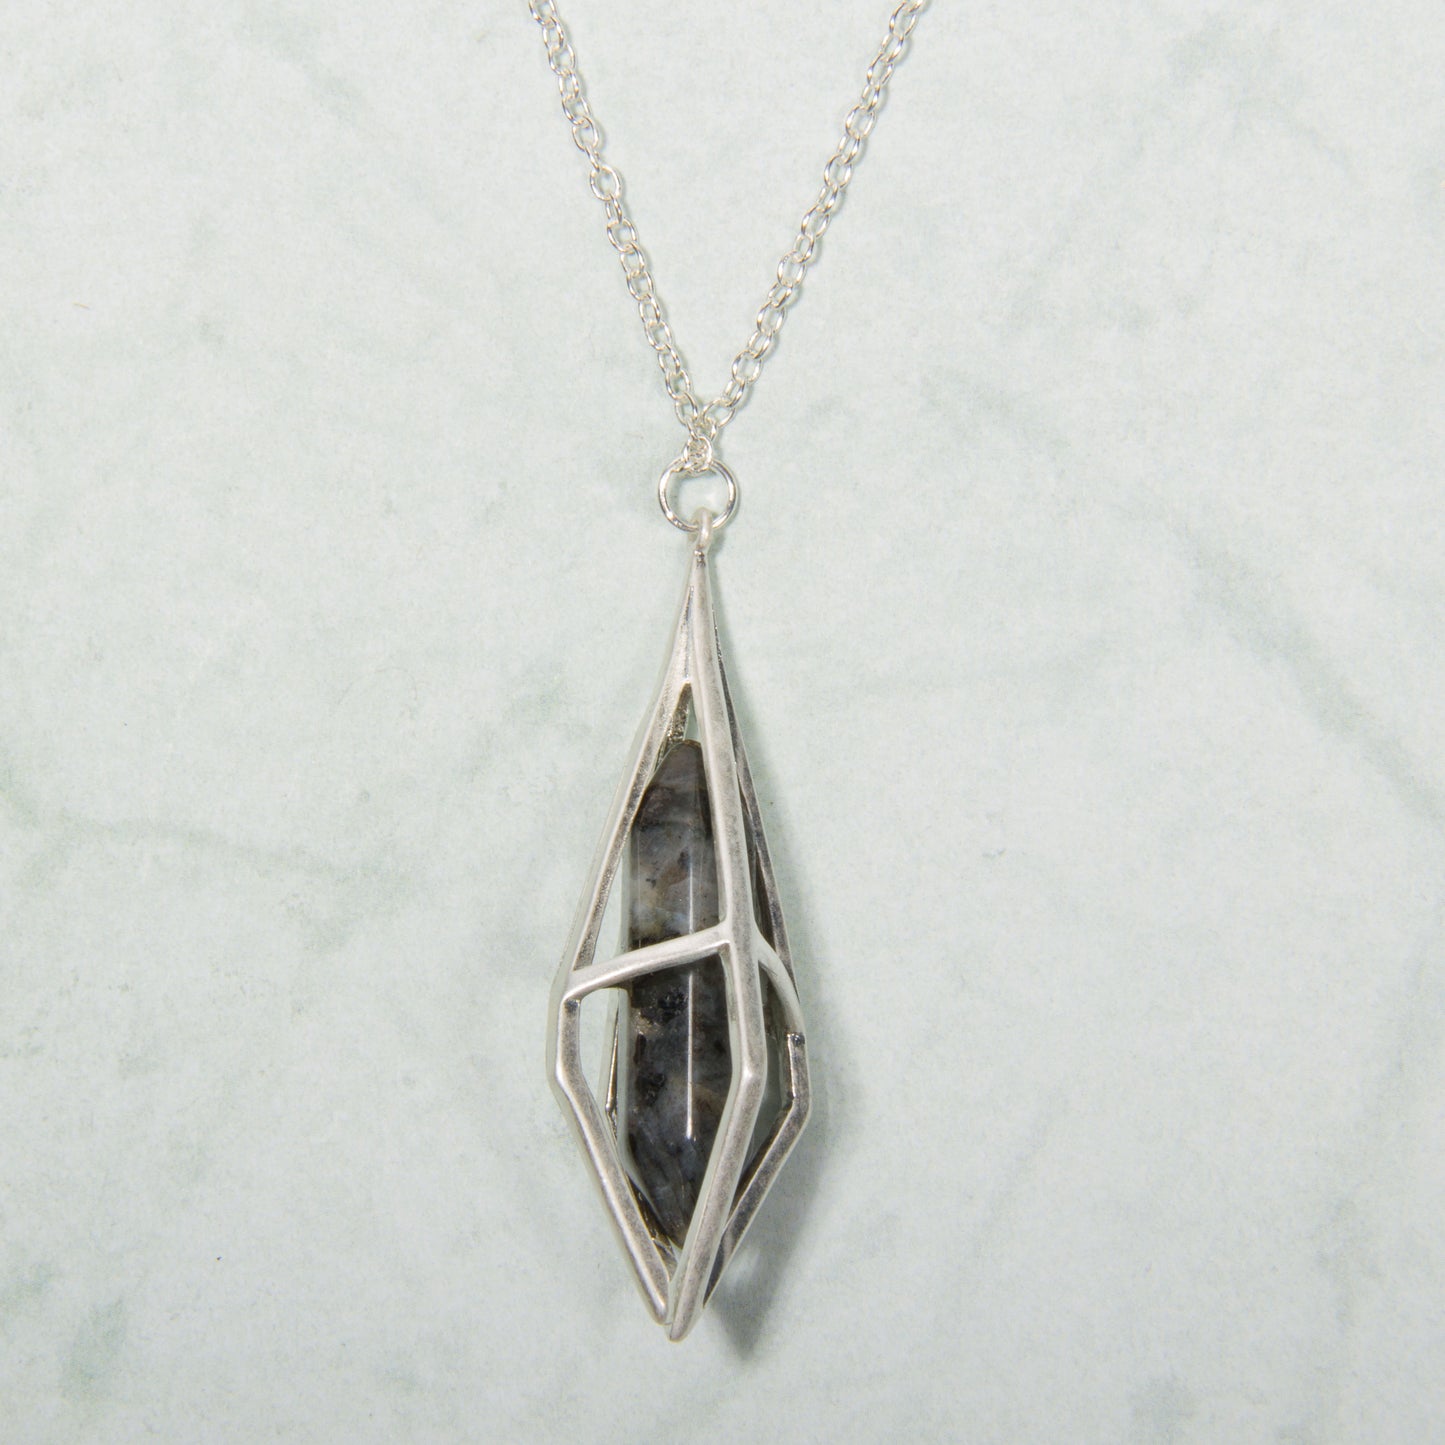 N3282-BK 24" Black Stone in Silver Cage Necklace